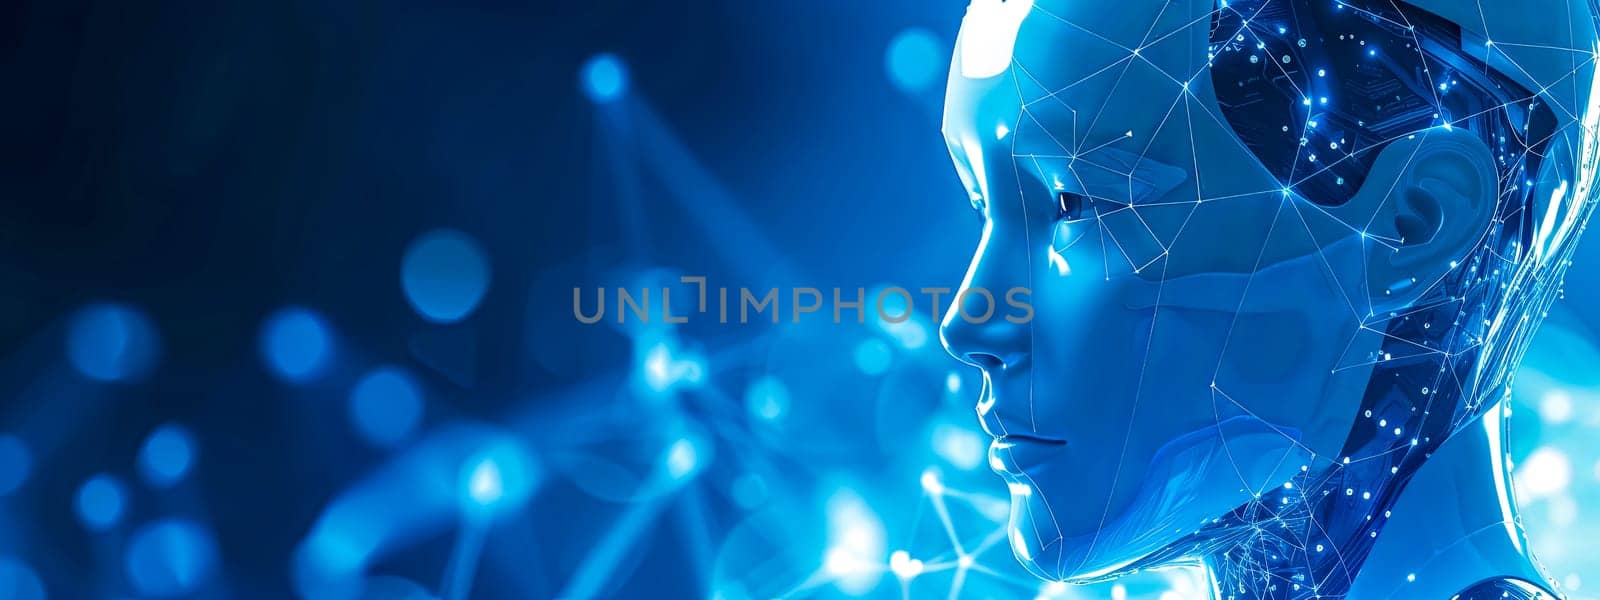 Futuristic Artificial Intelligence Concept with Digital Humanoid Face in Blue Virtual Network by Edophoto